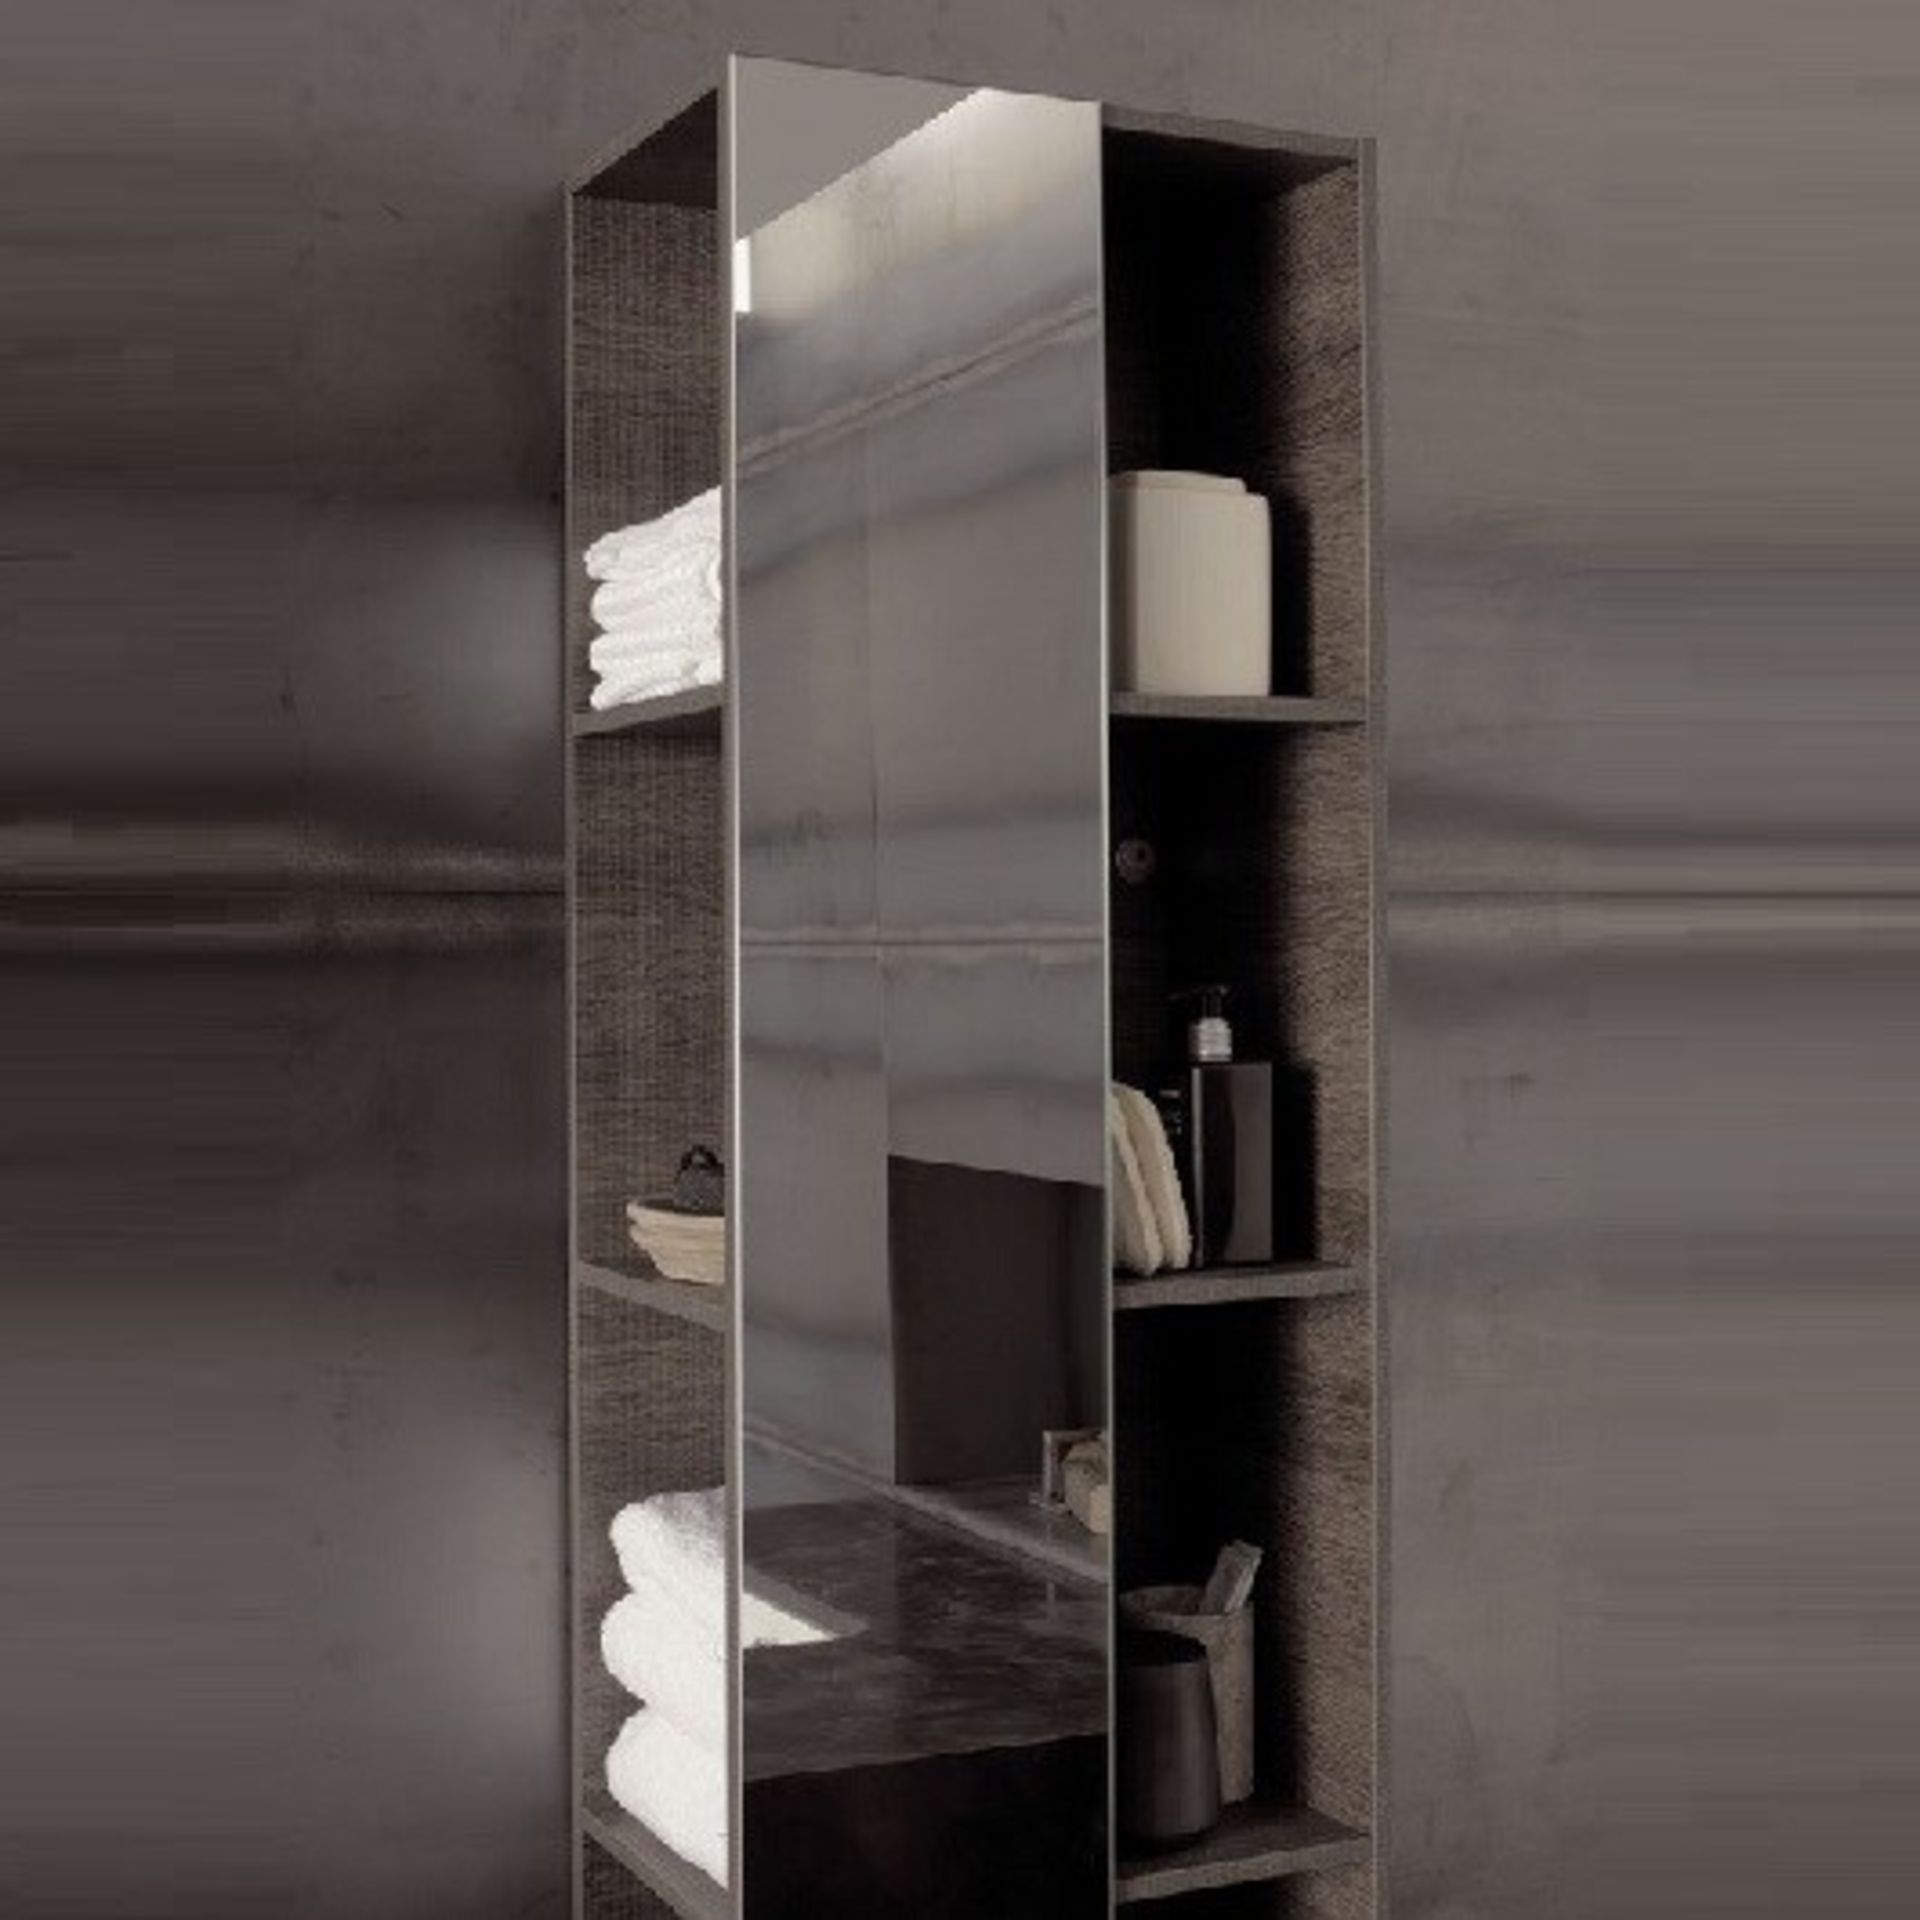 (PC4) 1600mm Keramag Citterio Grey/Brown Shelves with Mirror Tall Cabinet. RRP £865.99.Wood st...( - Image 2 of 4